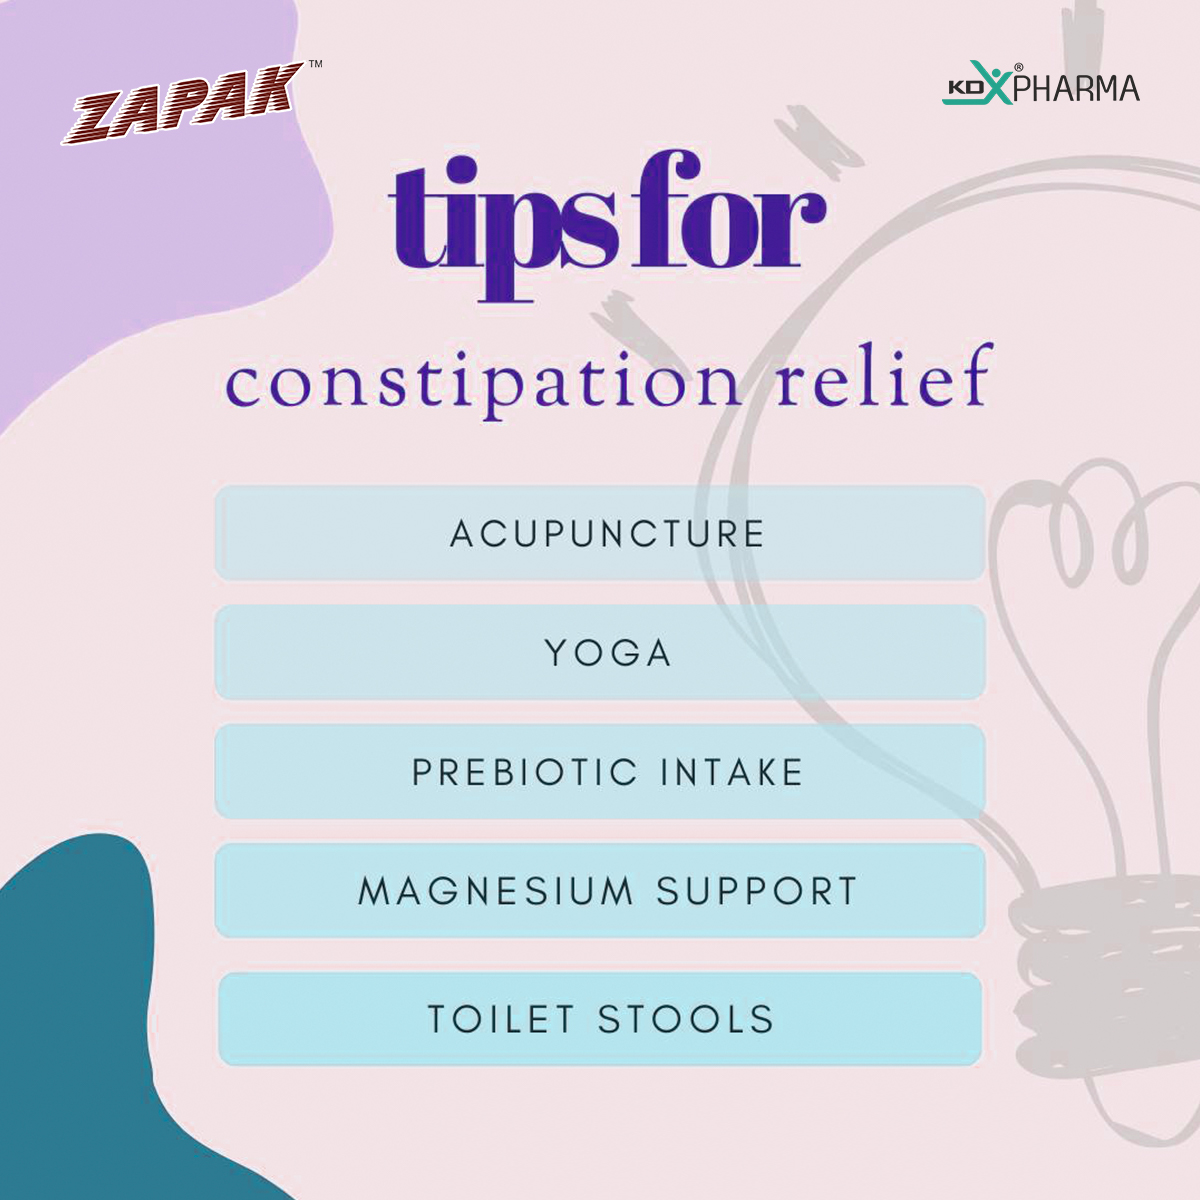 Tips for Constipation Relief:
 
> Acupuncture
> Yoga
>Prebiotic Intake
>Magnesium Support
> Toilet Stools
.
.
.
.
.
#acupunture #acupunctureworks #acupuncturerocks #acupunctureheals  #yoga #yogalove #yogapractice #prebiotic #zapaksesaaf #zapakchurna